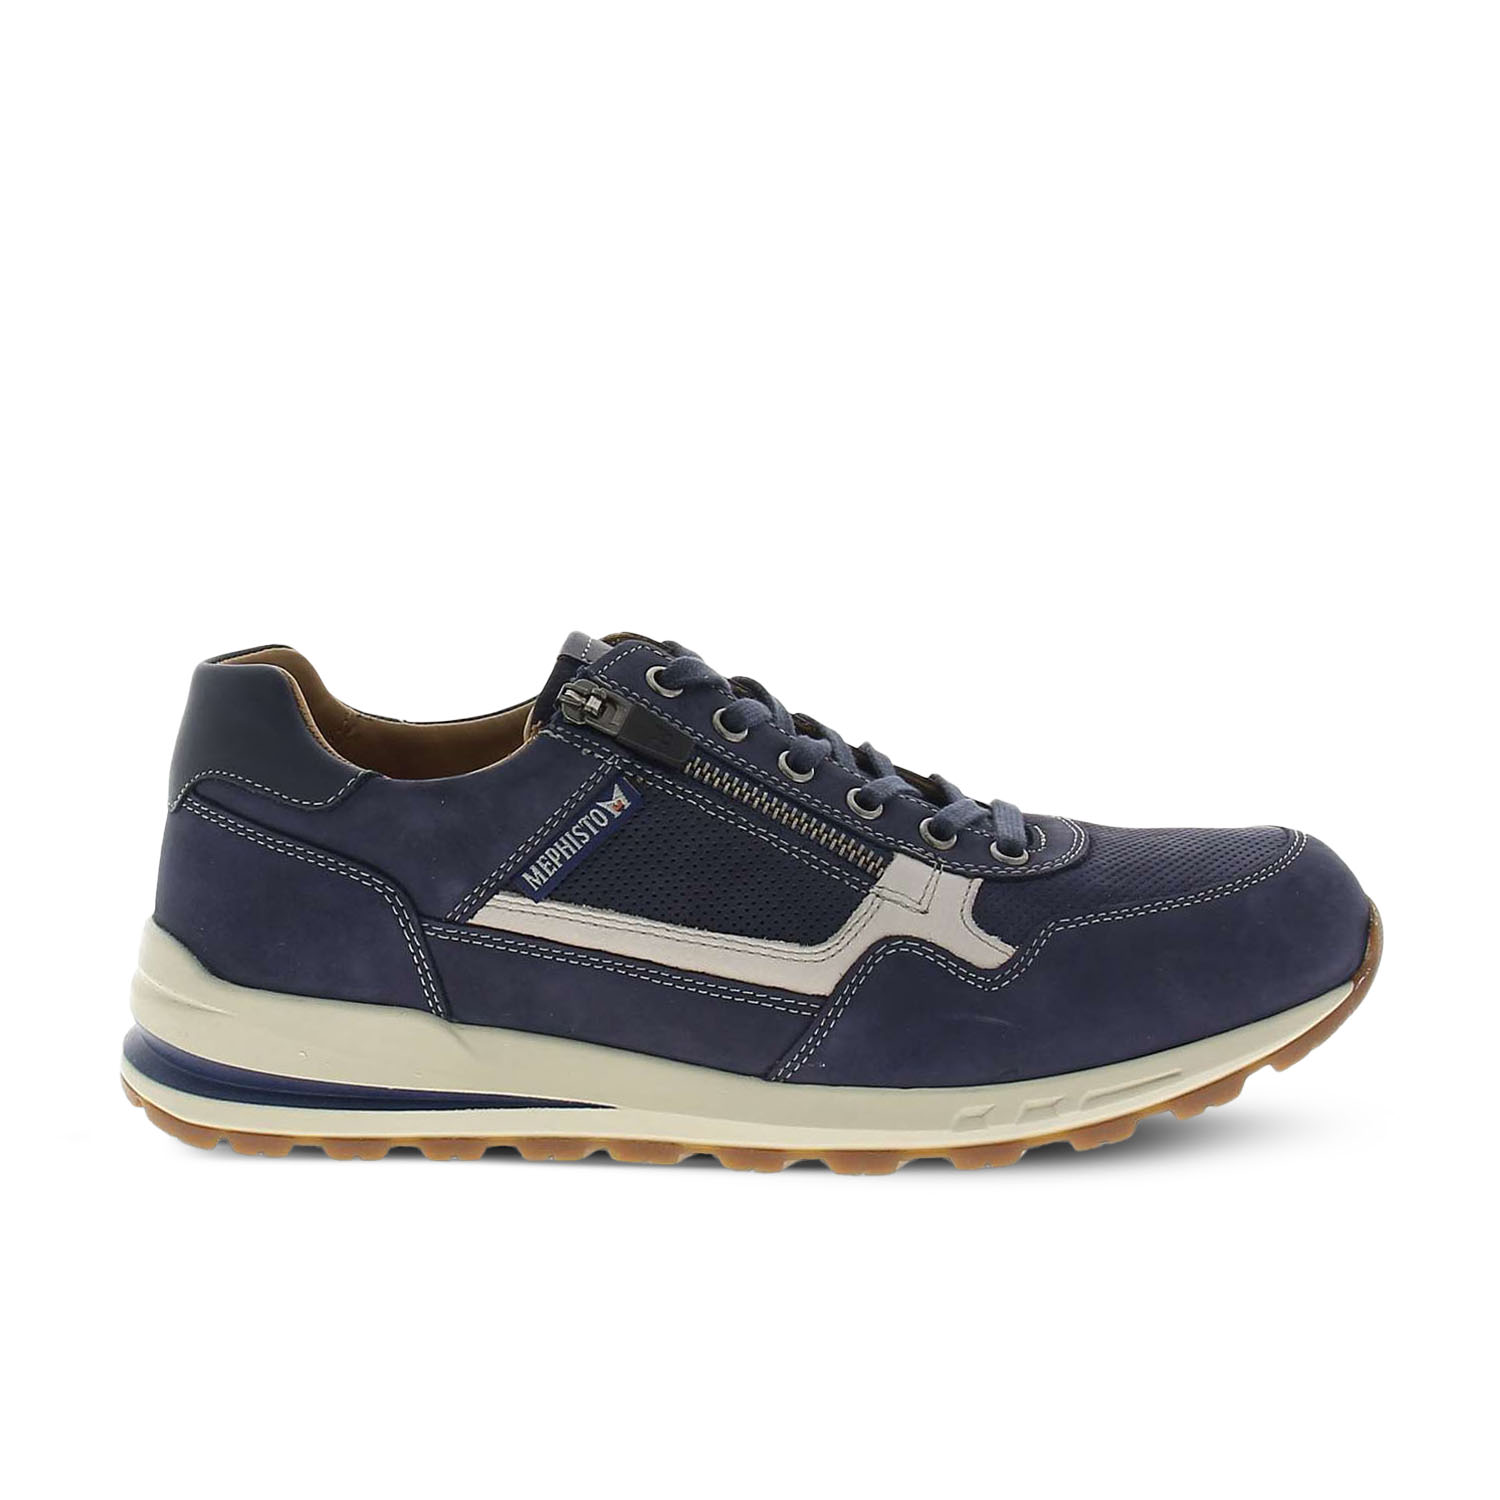 01 - BRADLEY - MEPHISTO - Chaussures à lacets - Cuir